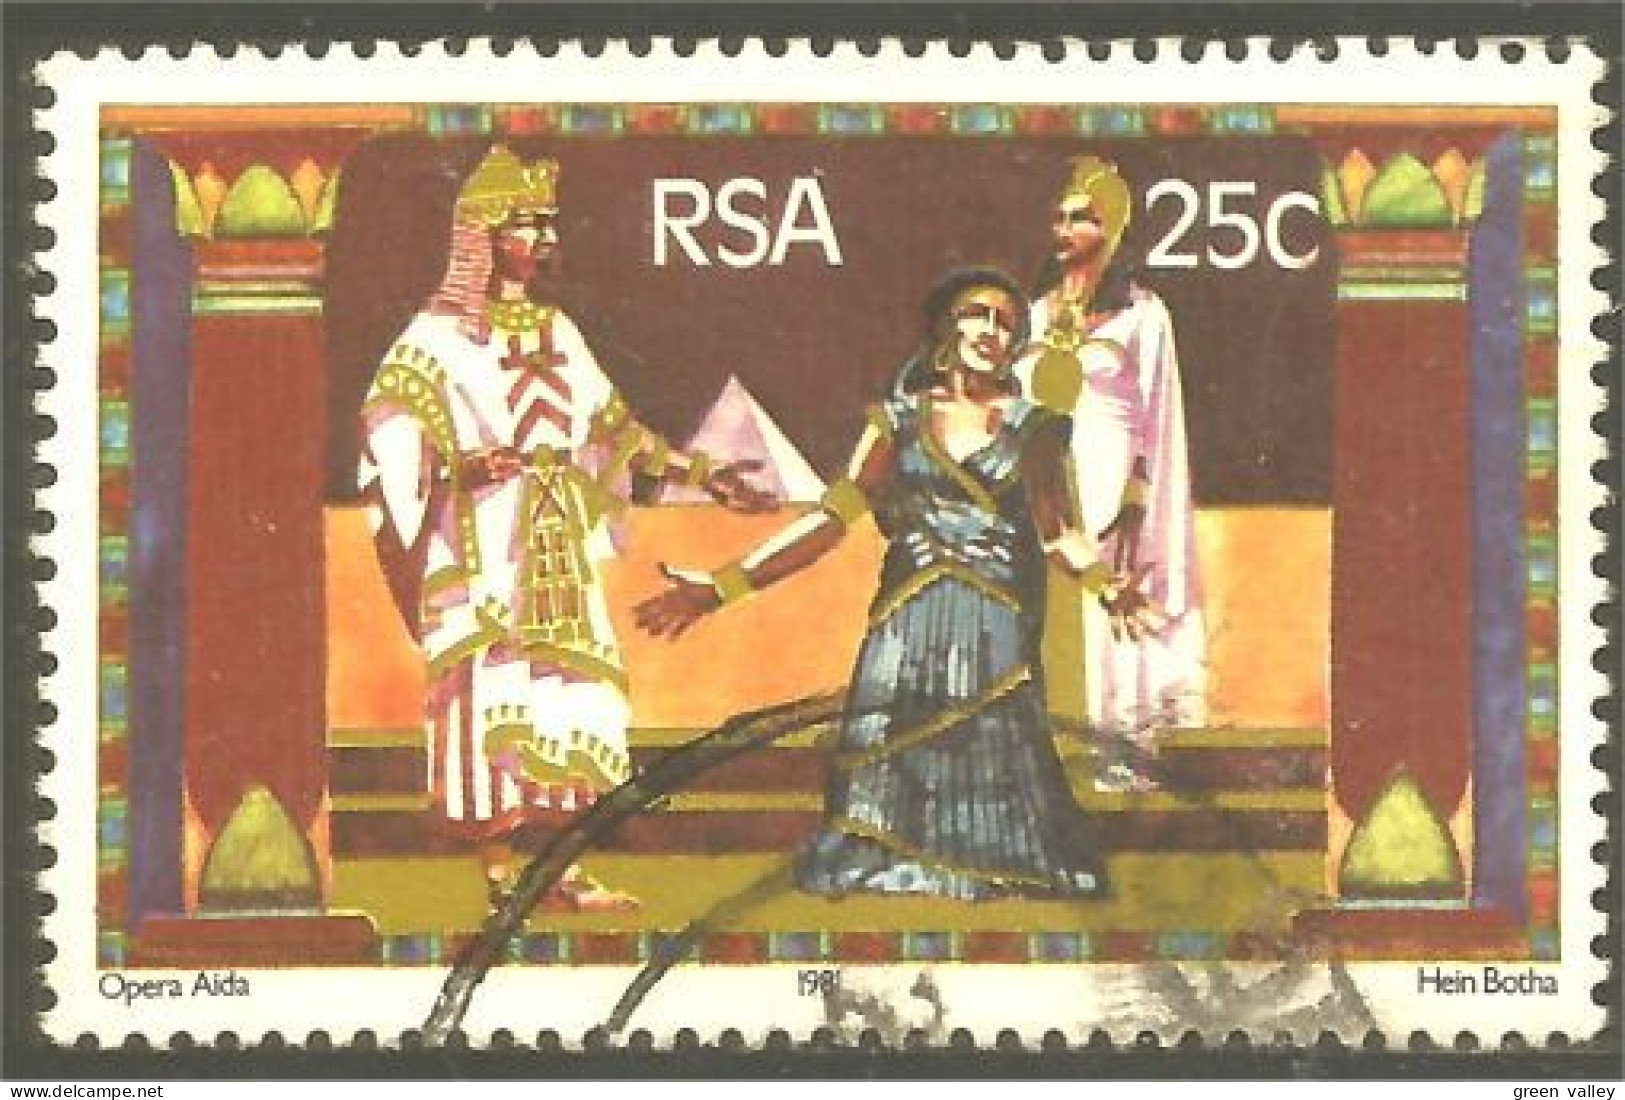 XW01-2152 RSA South Africa Opéra Opera Aida Music Musique Musik - Used Stamps